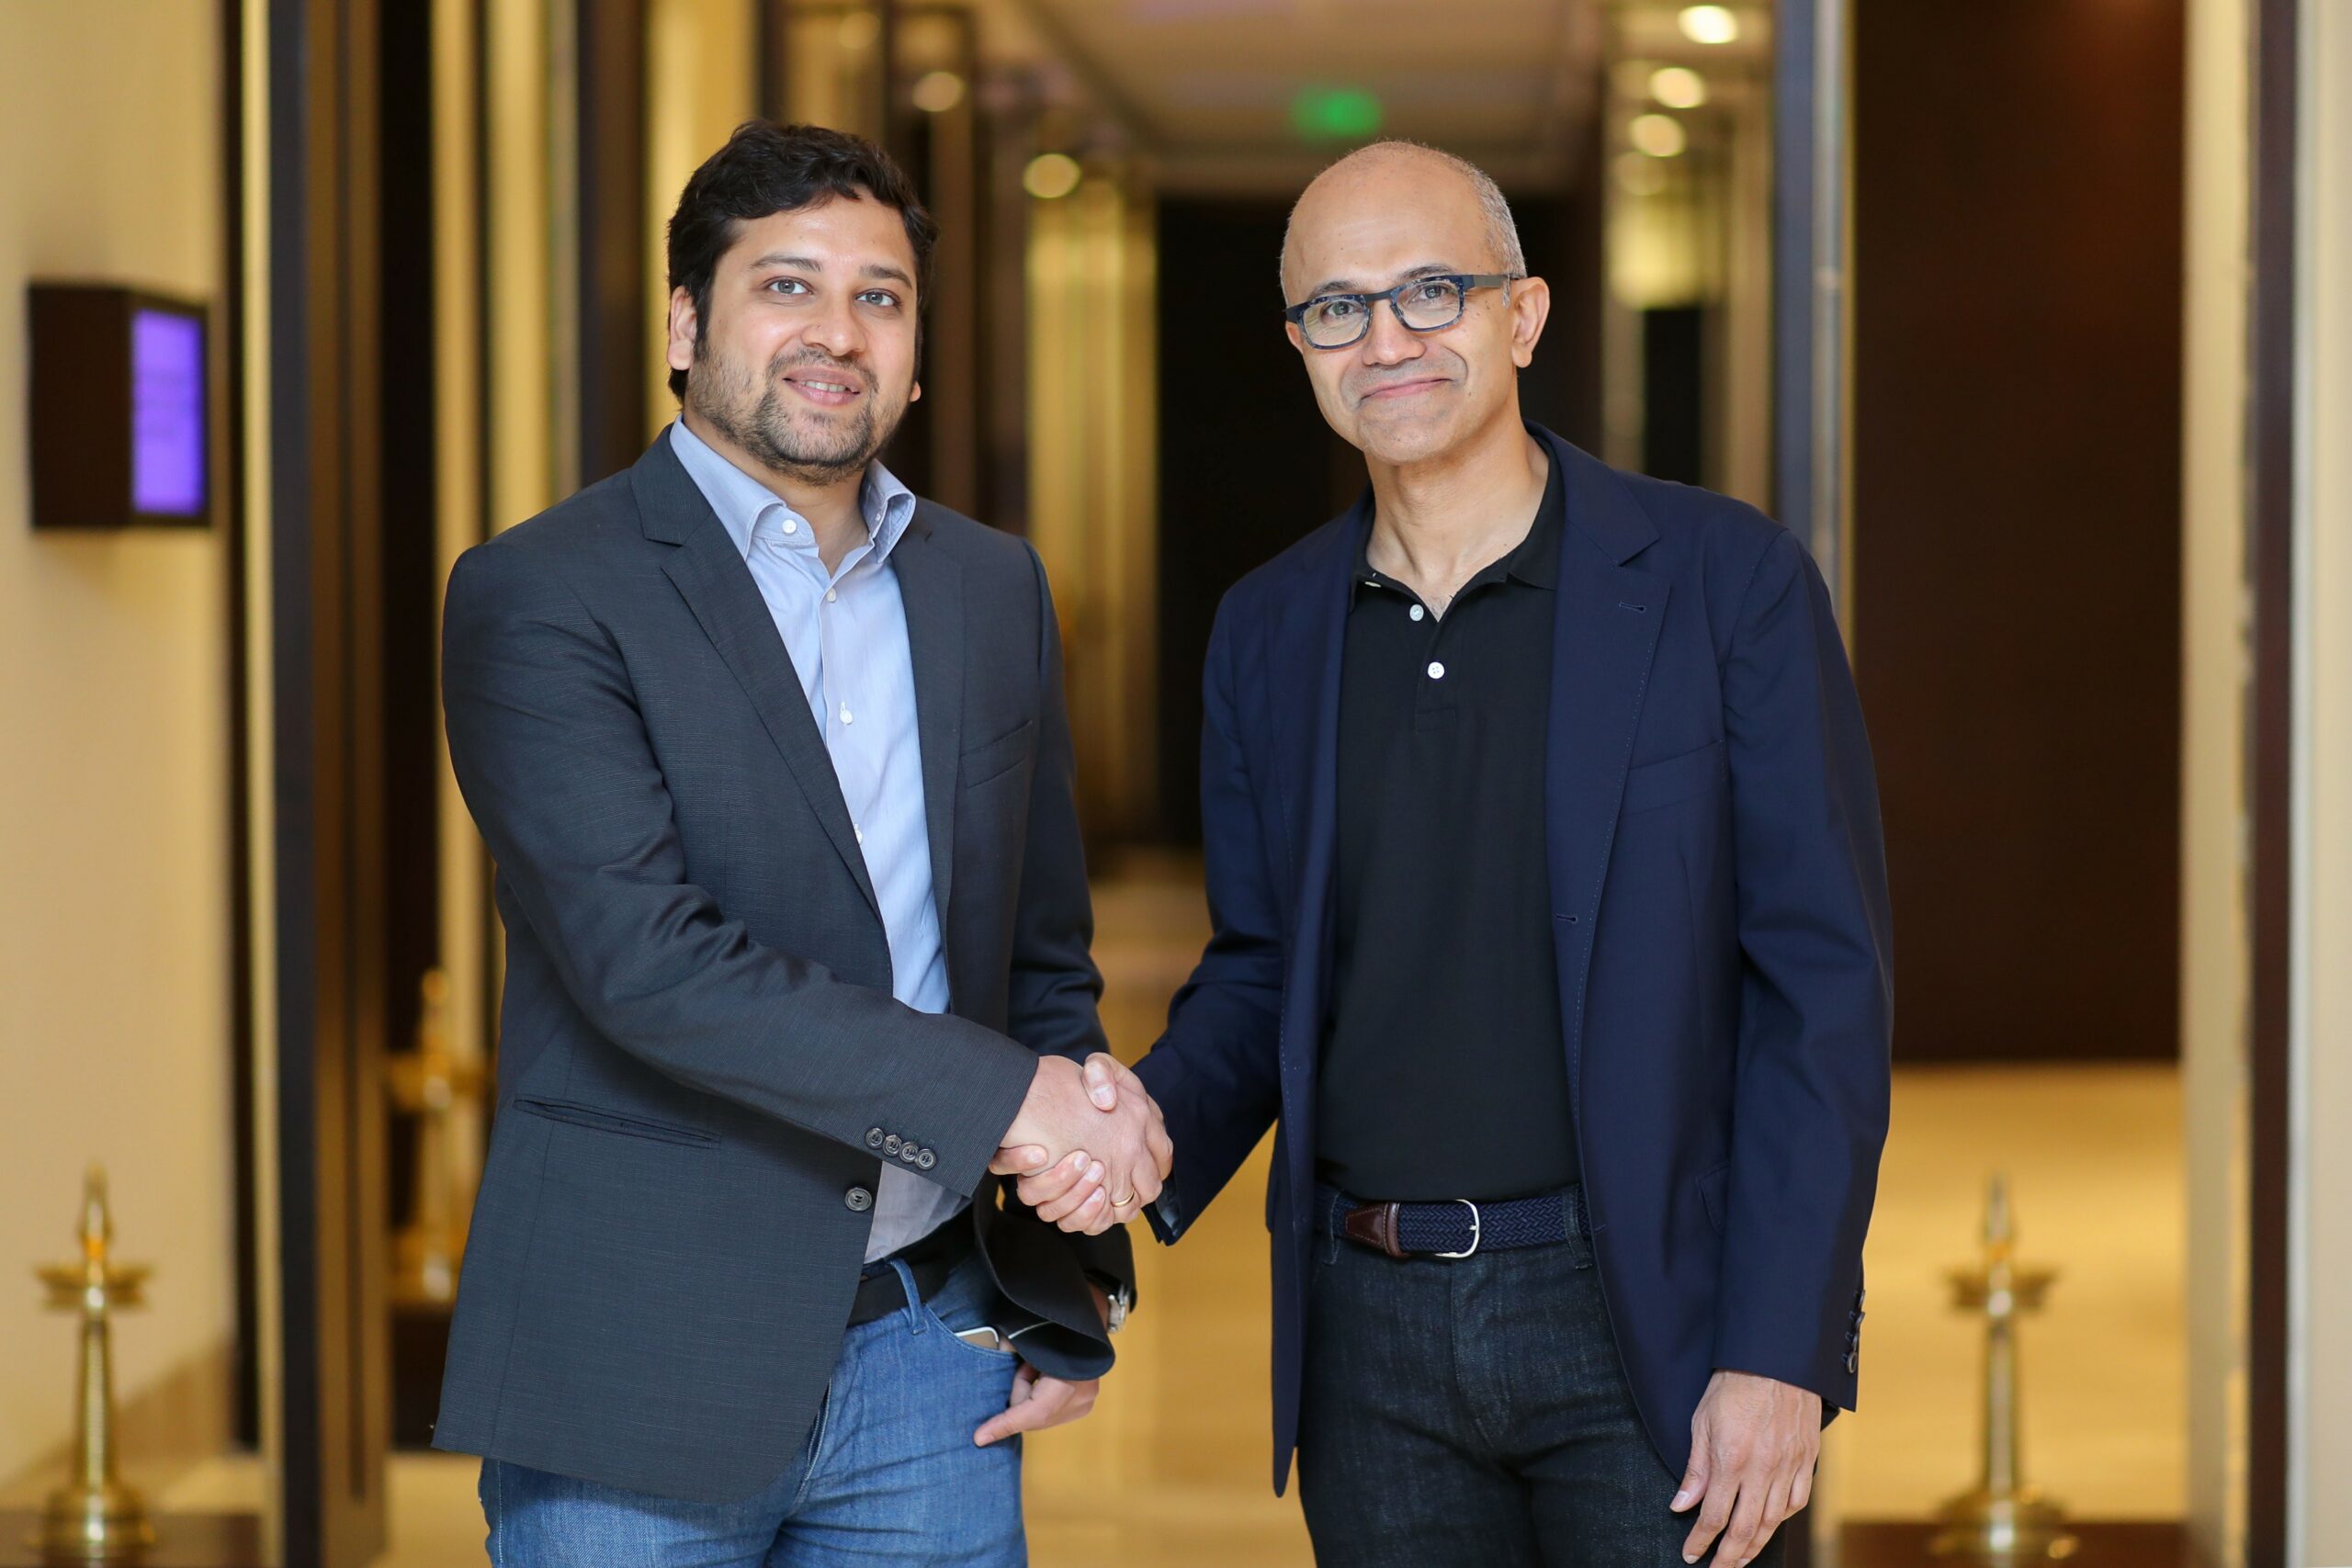 Flipkart and Microsoft join hands to bring Microsoft's Azure cloud service onboard